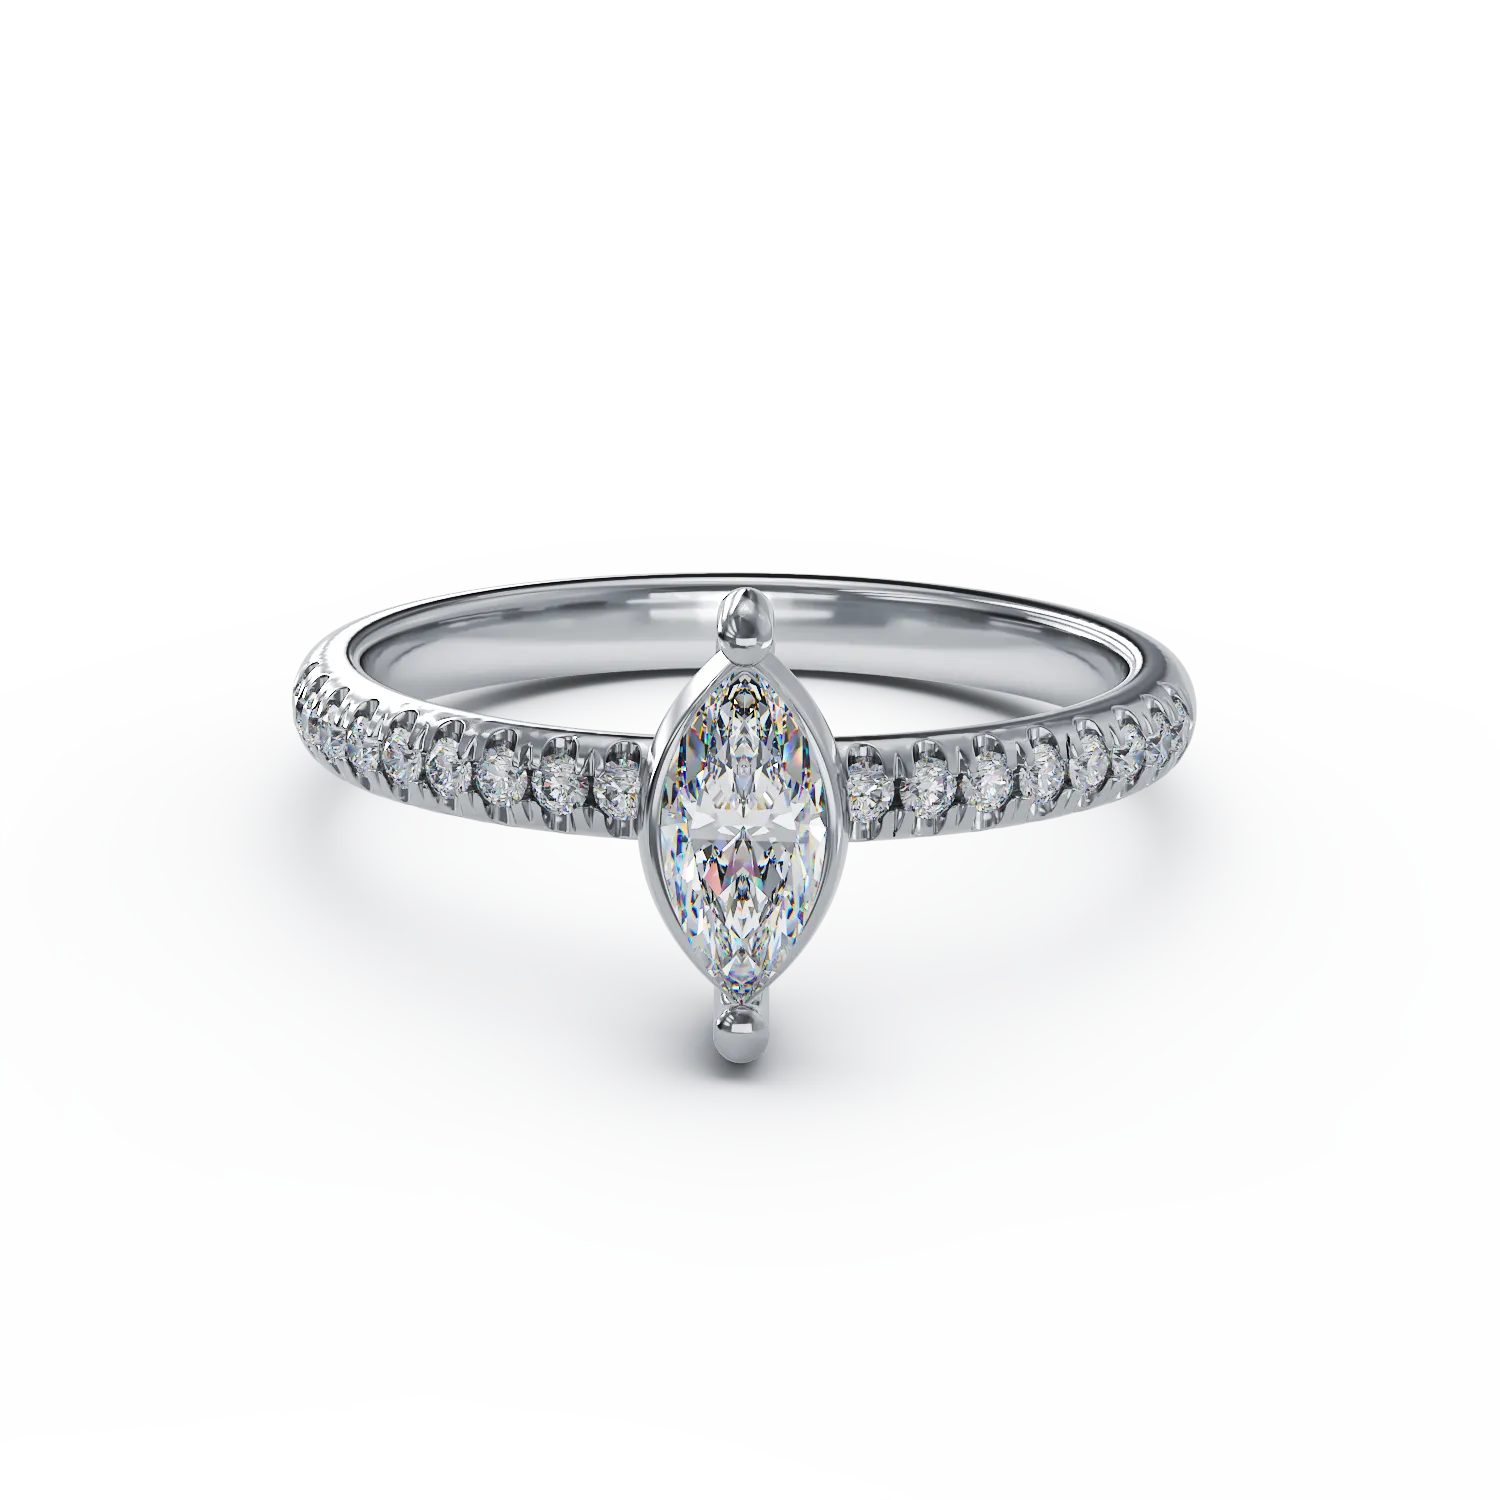 18K white gold engagement ring with 0.57ct diamonds